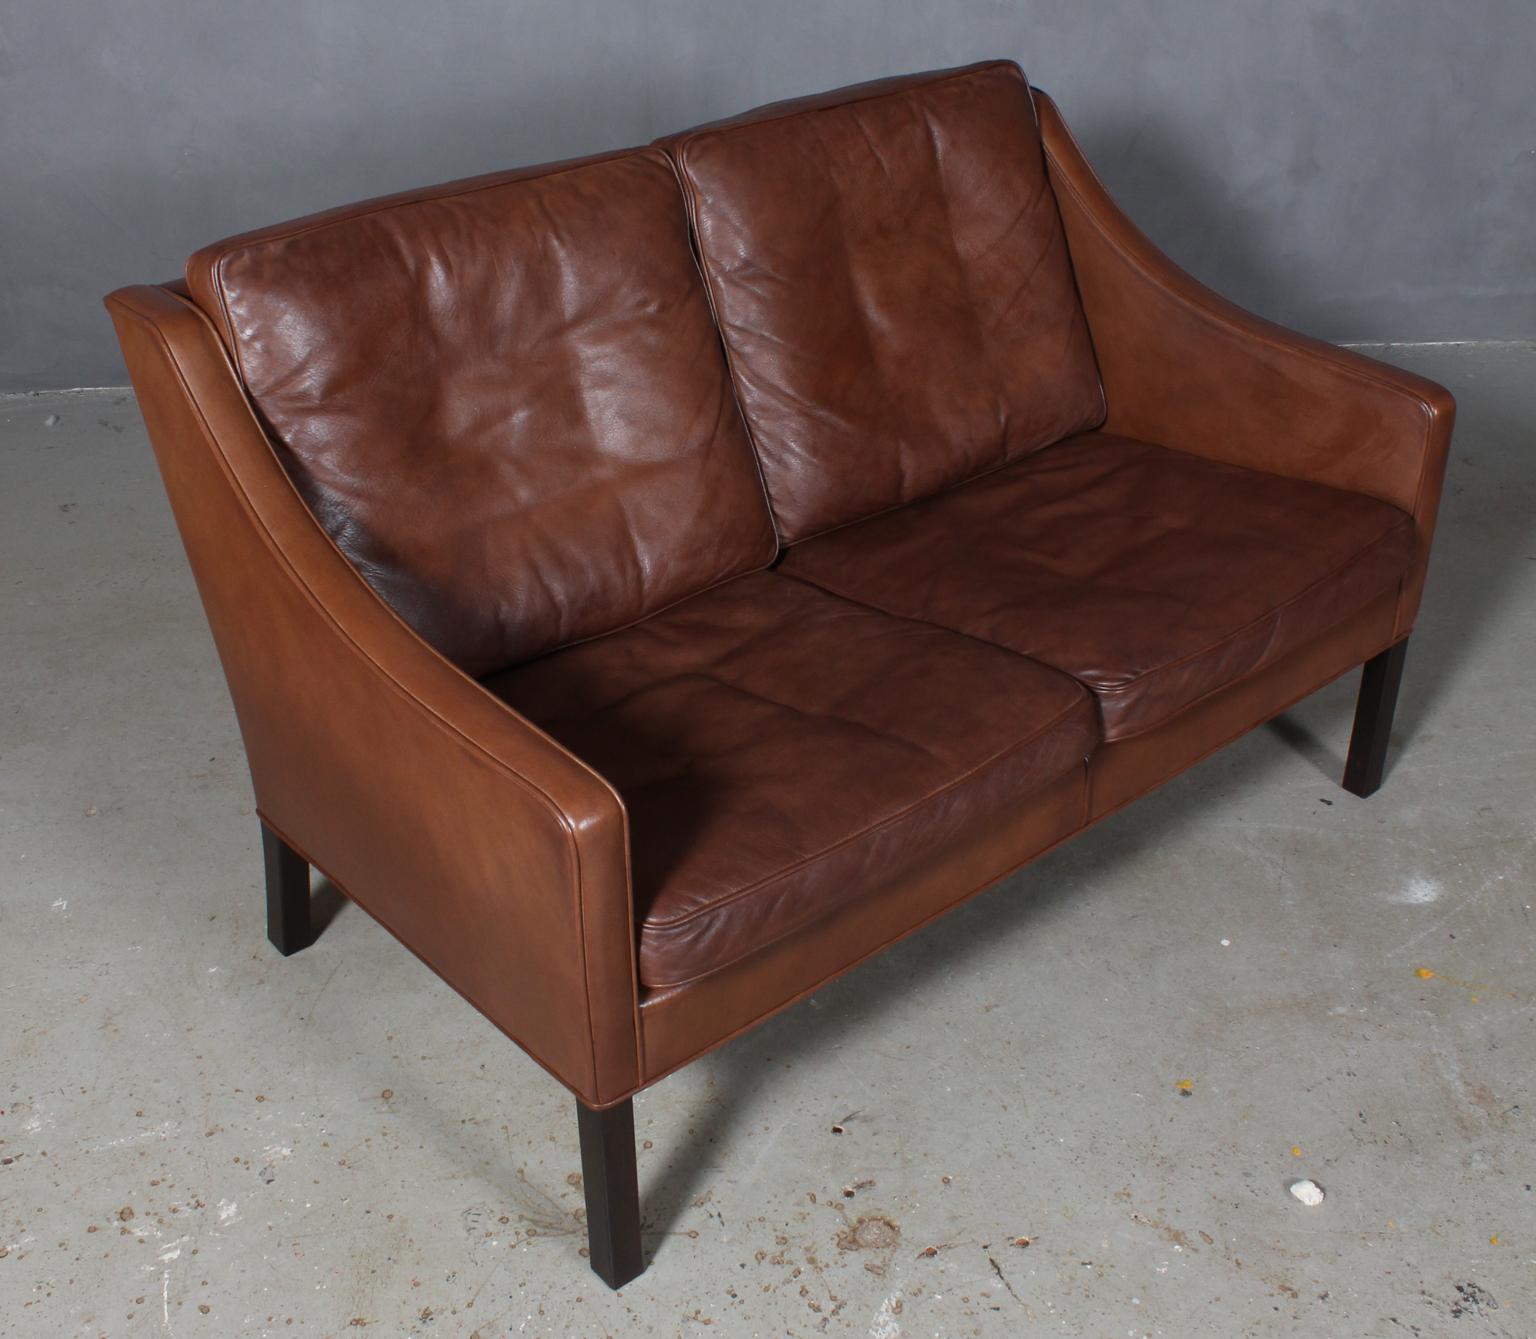 Børge Mogensen two-seat sofa original upholstered with brown leather upholstery.

Legs of mahogany.

Model 2208, made by Fredericia furniture.